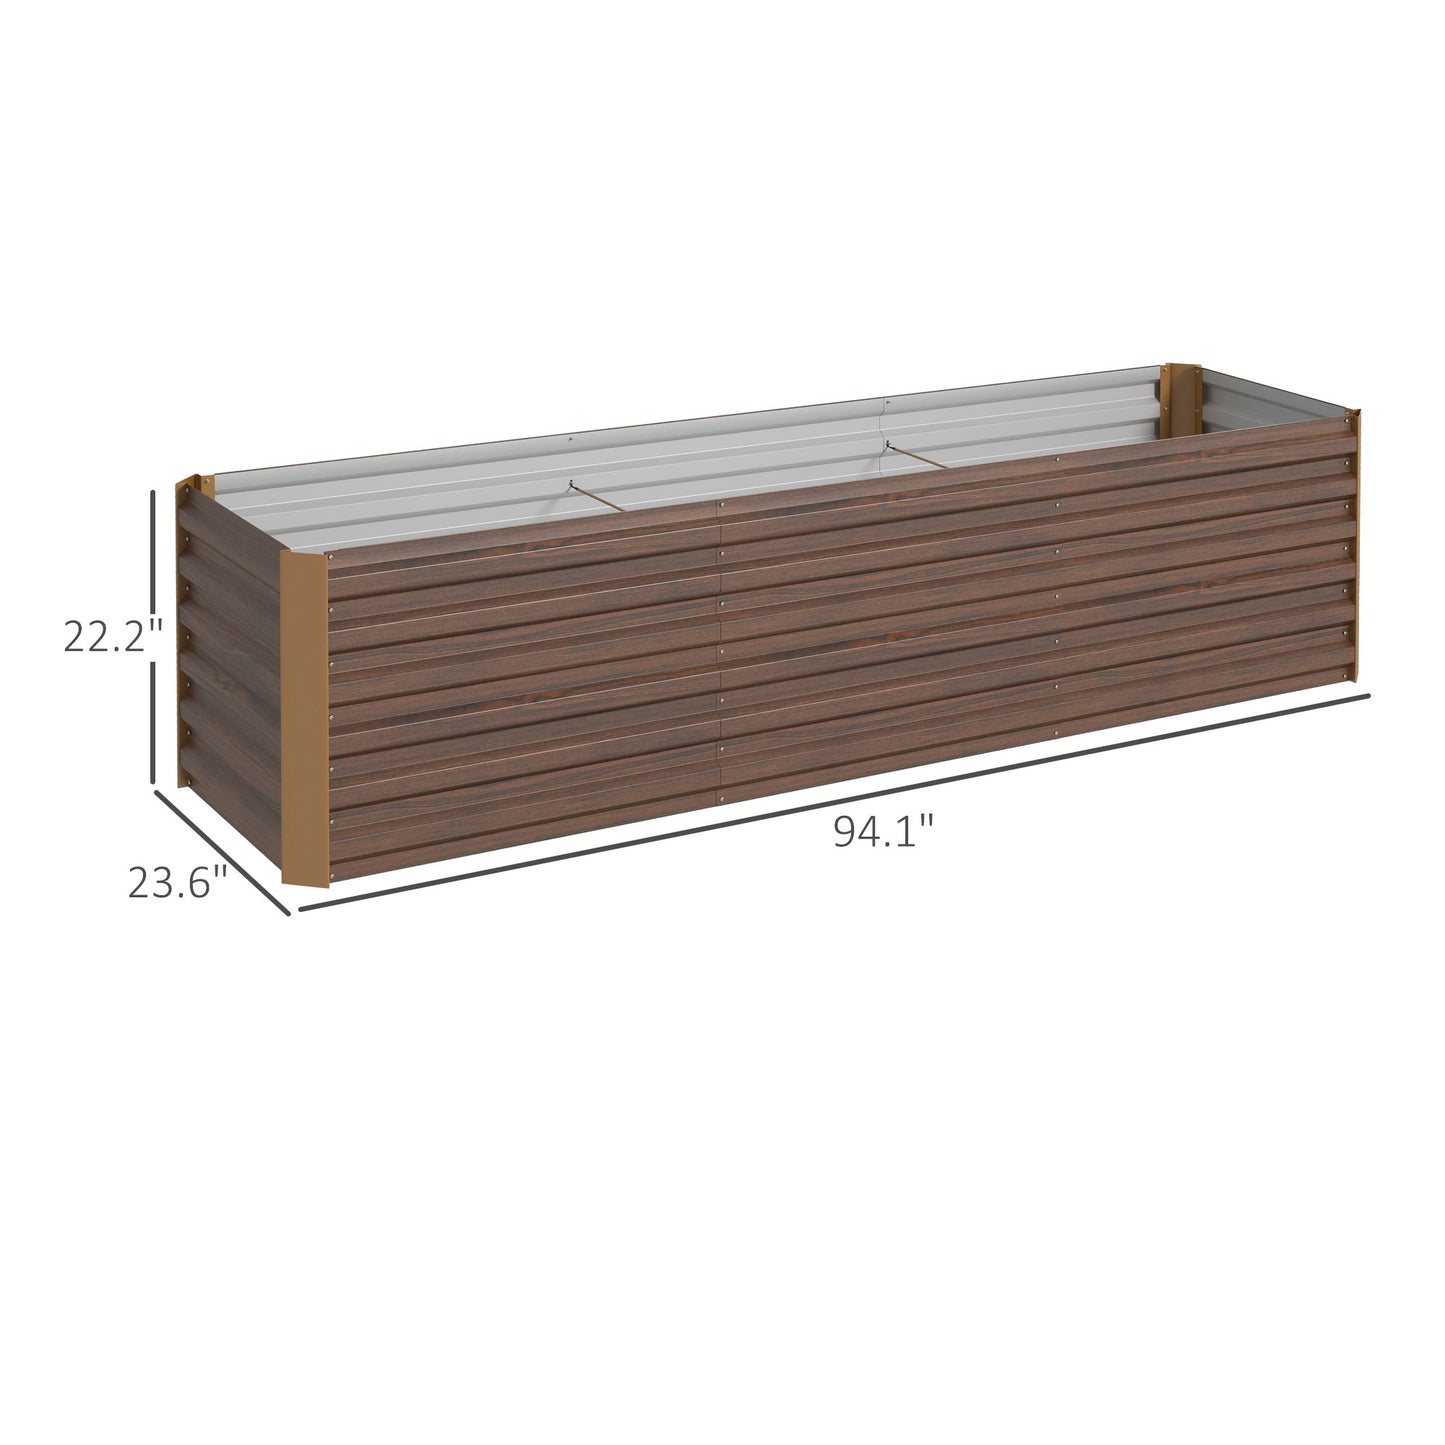 -Outsunny 8'x2'x2' Large Galvanized Raised Garden Bed Kit Outdoor Metal Elevated Planter Box with Safety Edging, Brown - Outdoor Style Company